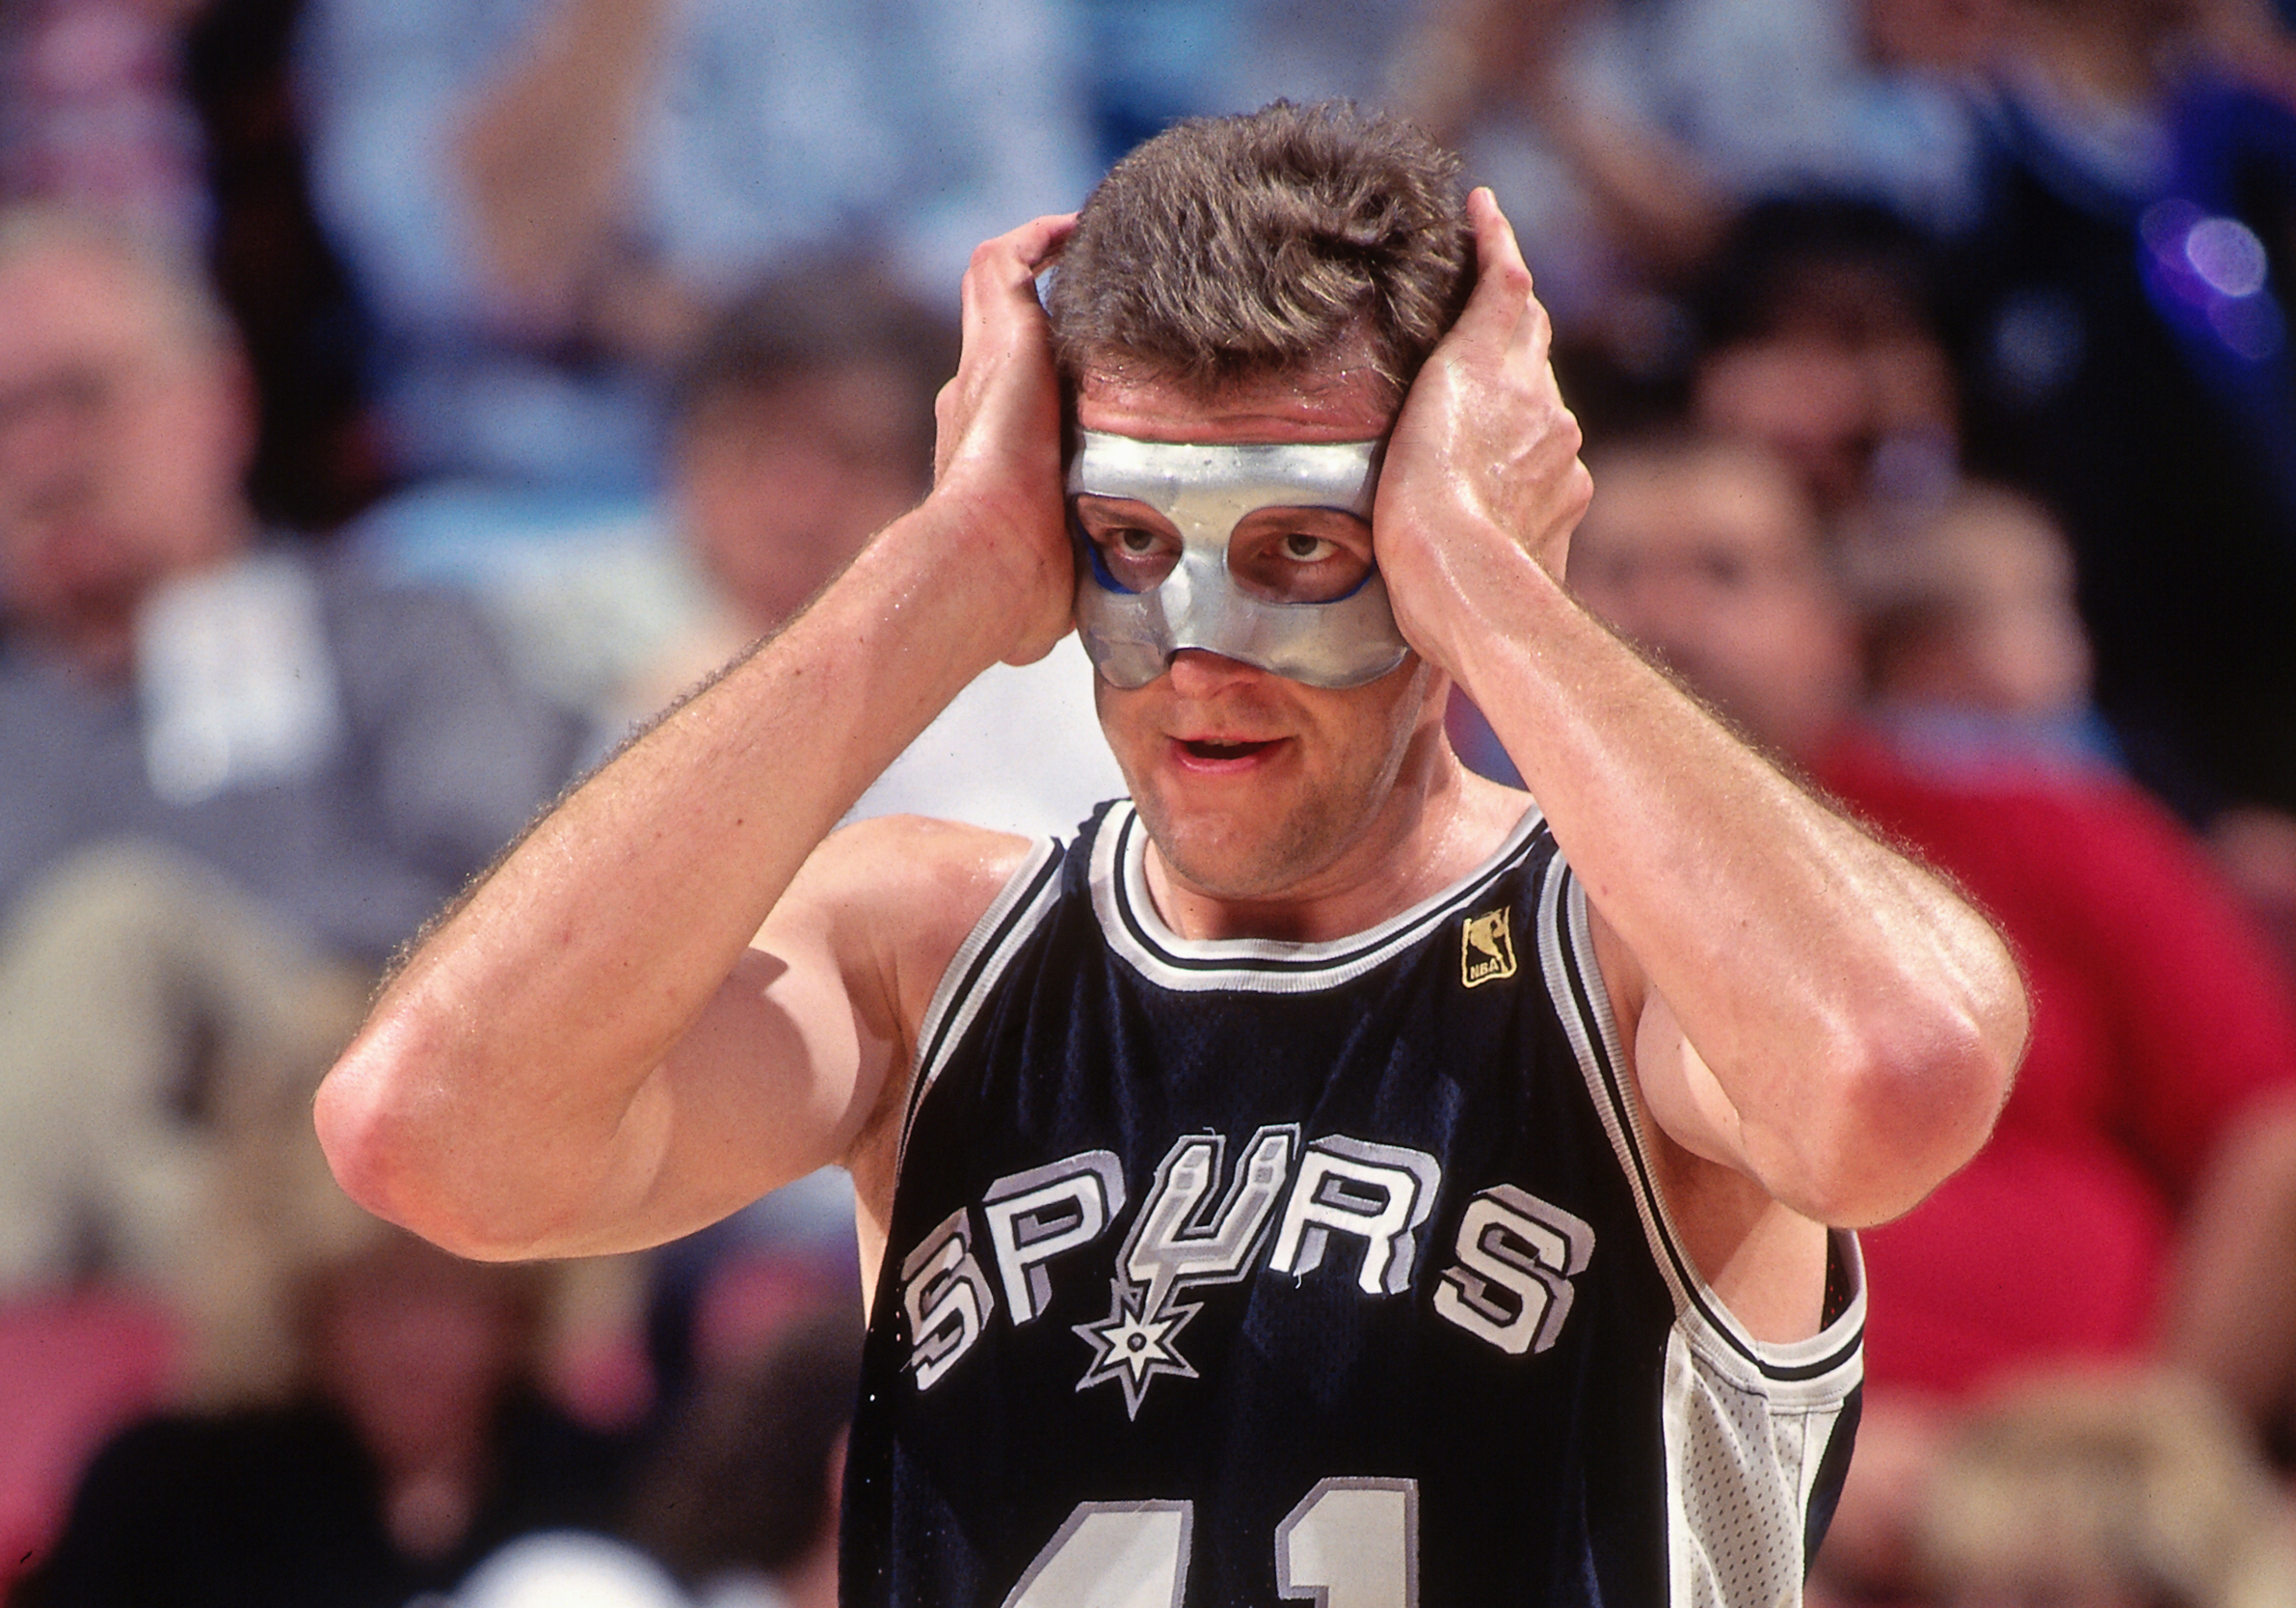 The NBA's Masked Men: players who played in protective gear